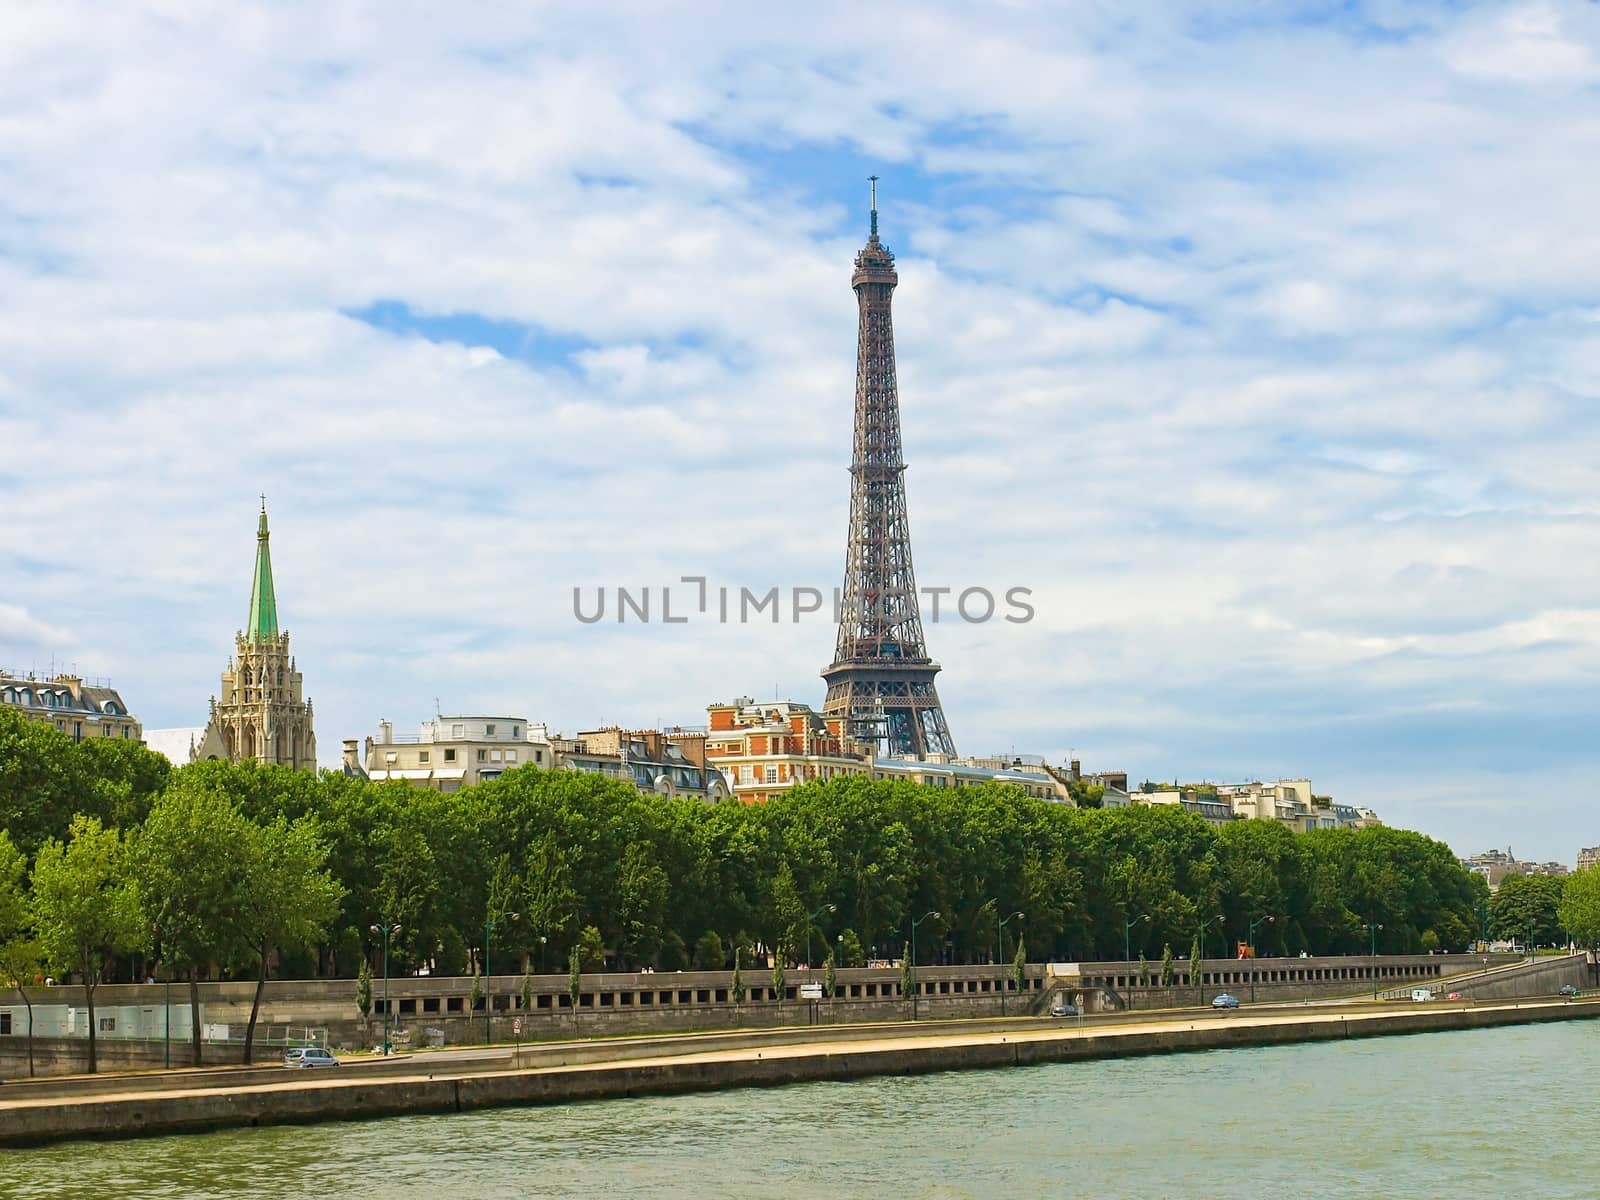 A view of the Eiffel tower from the river Seine.